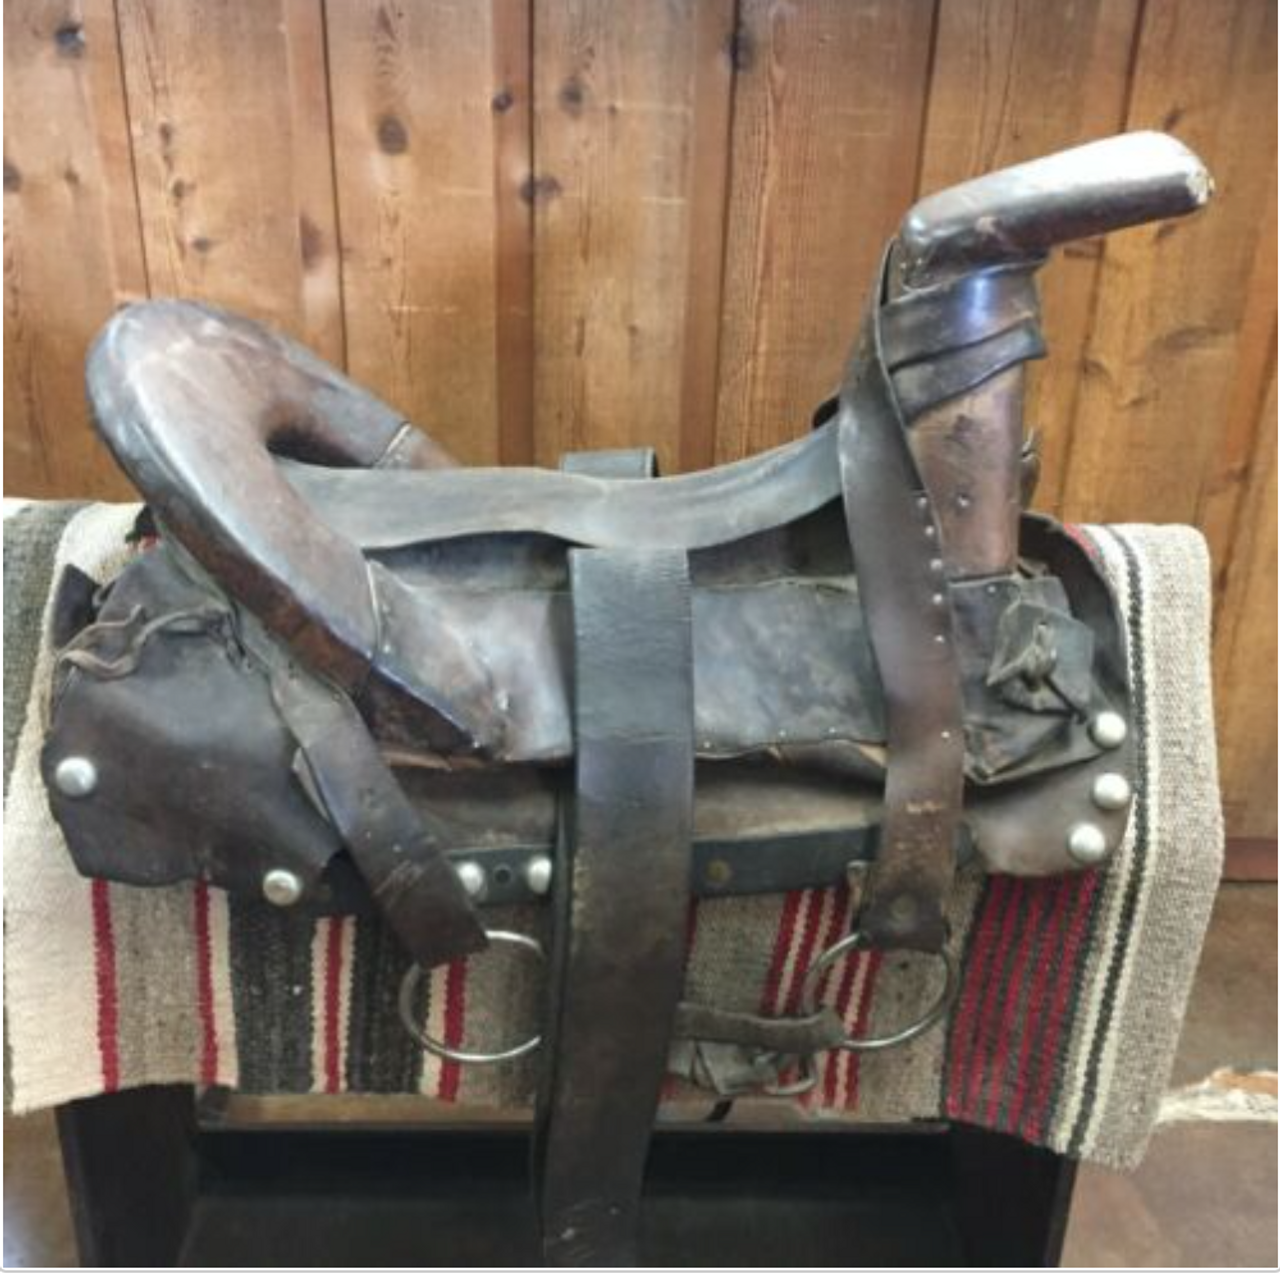 A Rare Example of a Native American Navajo Saddle - Late 1800s. - $2,500